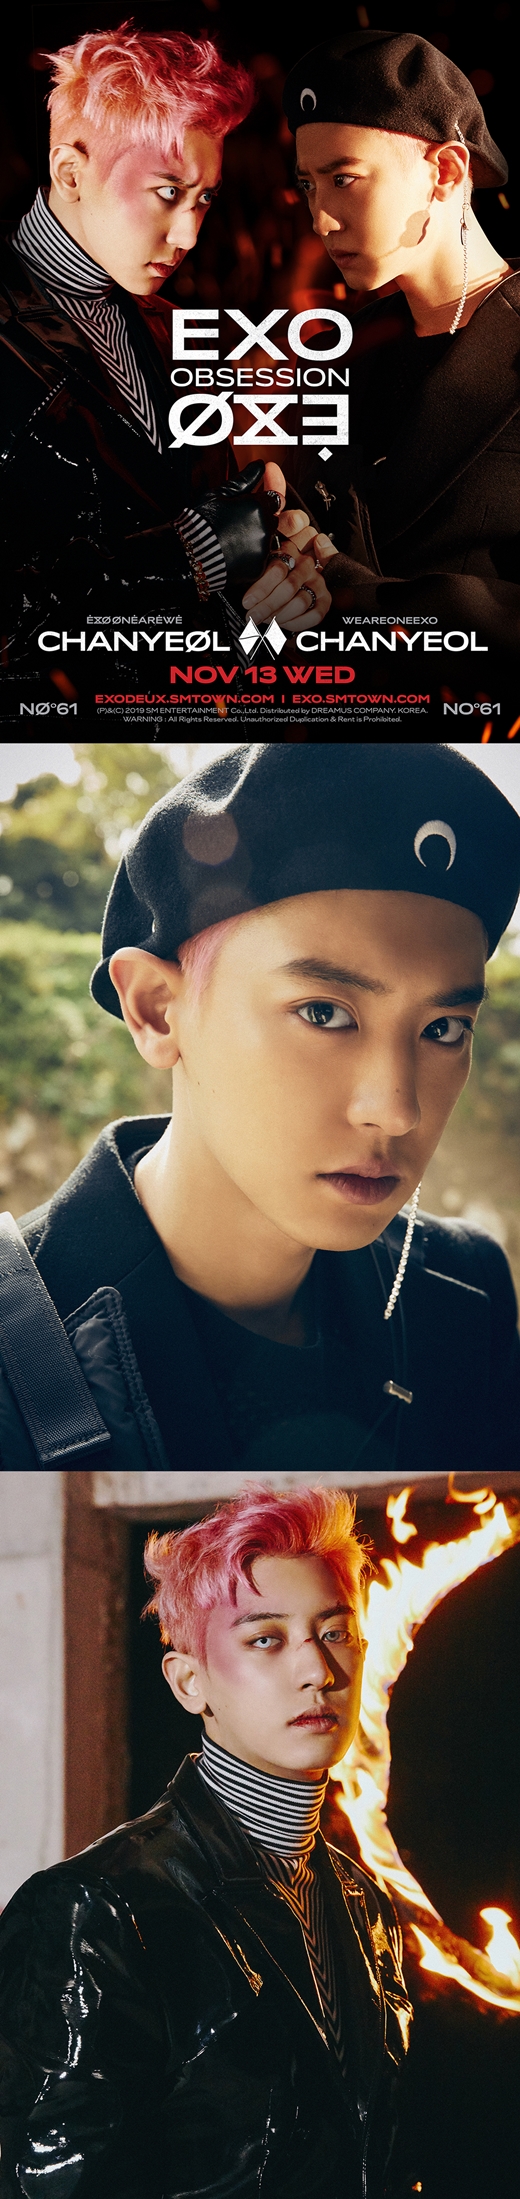 EXO member Chanyeols teaser image has been released and is a hot topic.Prior to the release of Regular 6th album OBSESSION, the teaser image released through various SNS accounts of EXO and X-EXO caught the attention of global fans as it was contrasted with EXO Chanyeol, which has intense eyes and high-quality visuals, and X-EXO Chanyeol, which has a sharp and deadly aura.In addition, this album will be released at 6 pm on the 27th at various music sites, and it contains 10 songs from various genres including the title song Obsession Korean and Chinese versions, which is enough to meet EXOs mature music world.Also, the title song Obsession is a hip-hop dance song with impressive addictiveness and heavy beat of repeated vocal samples like magic, and the lyrics have solved the will to escape from the darkness of the terrible obsession toward oneself in a straightforward monologue form.On the other hand, EXO Regular 6th album OBSESSION will also be released on the 27th as a record, and can be purchased at various on-line and off-line record stores. (Photo: SM)news report